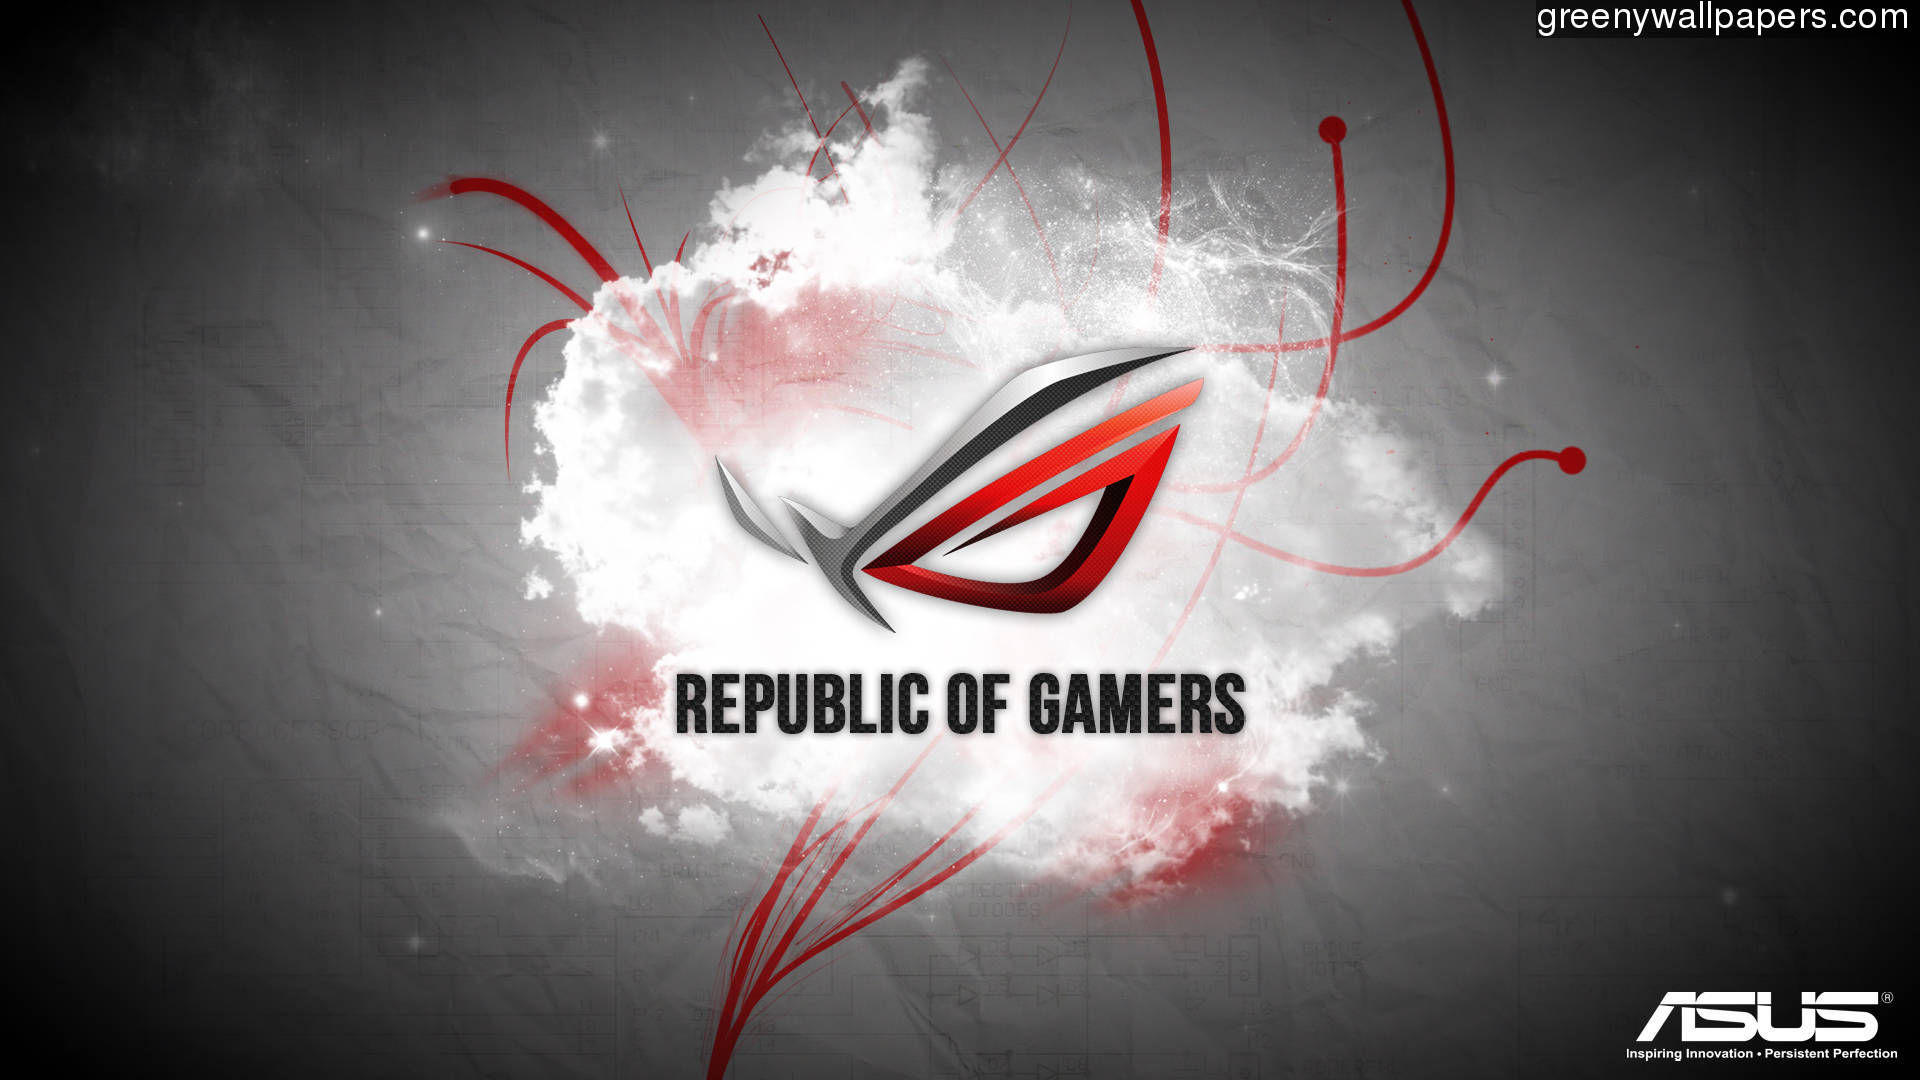 237950_galerie_concours_asus_rog_wallpapers_1920x1080.jpg